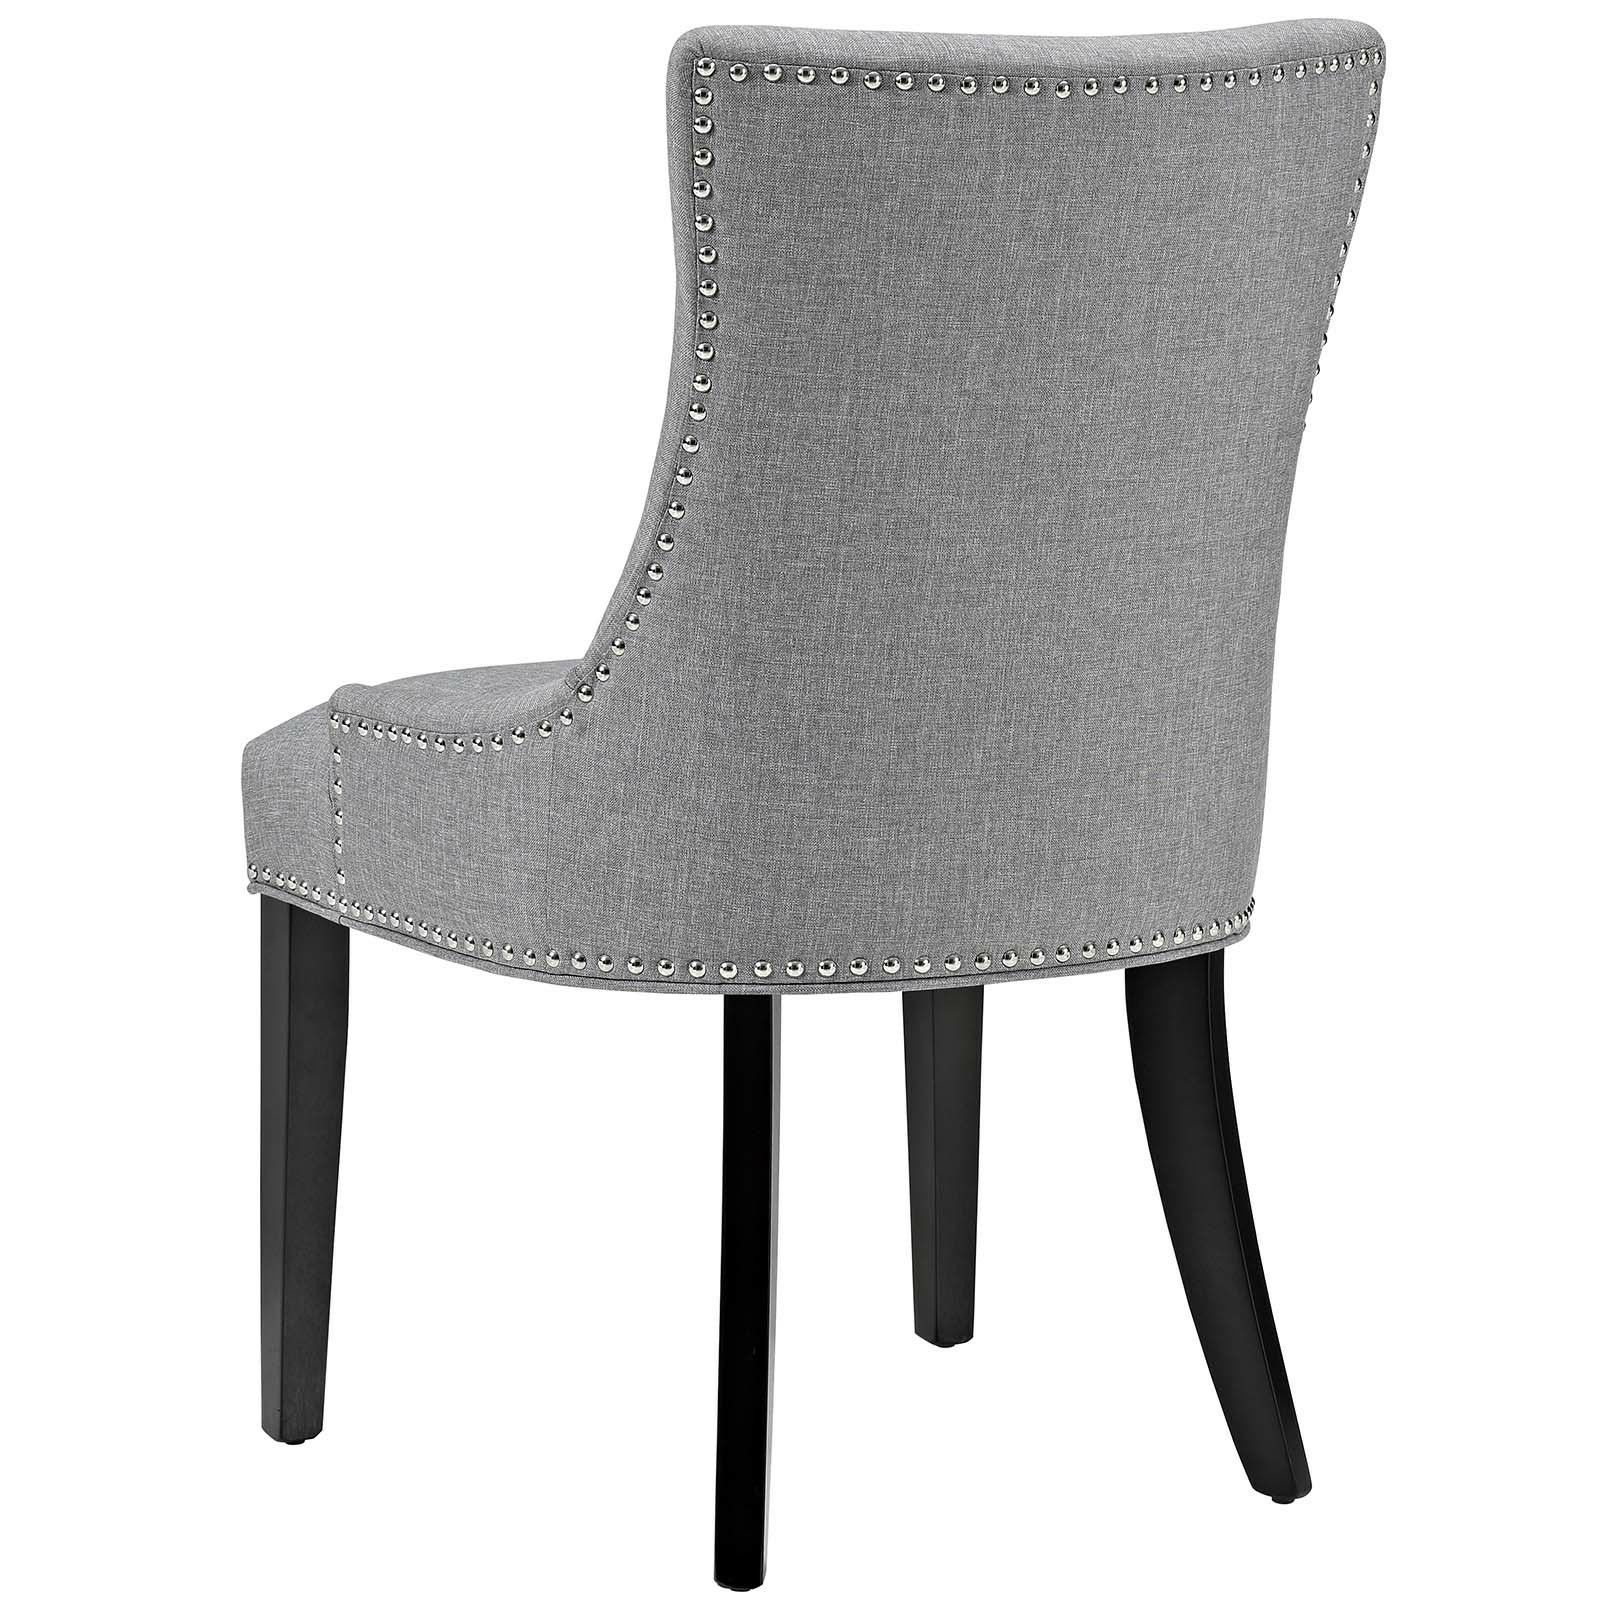 Dark Gray Fabric Outdoor Patio Bar Chairs Sets Throughout Preferred Upholstered Fabric Nailhead Parsons Dining Side Chairs In Light Gray (View 12 of 15)